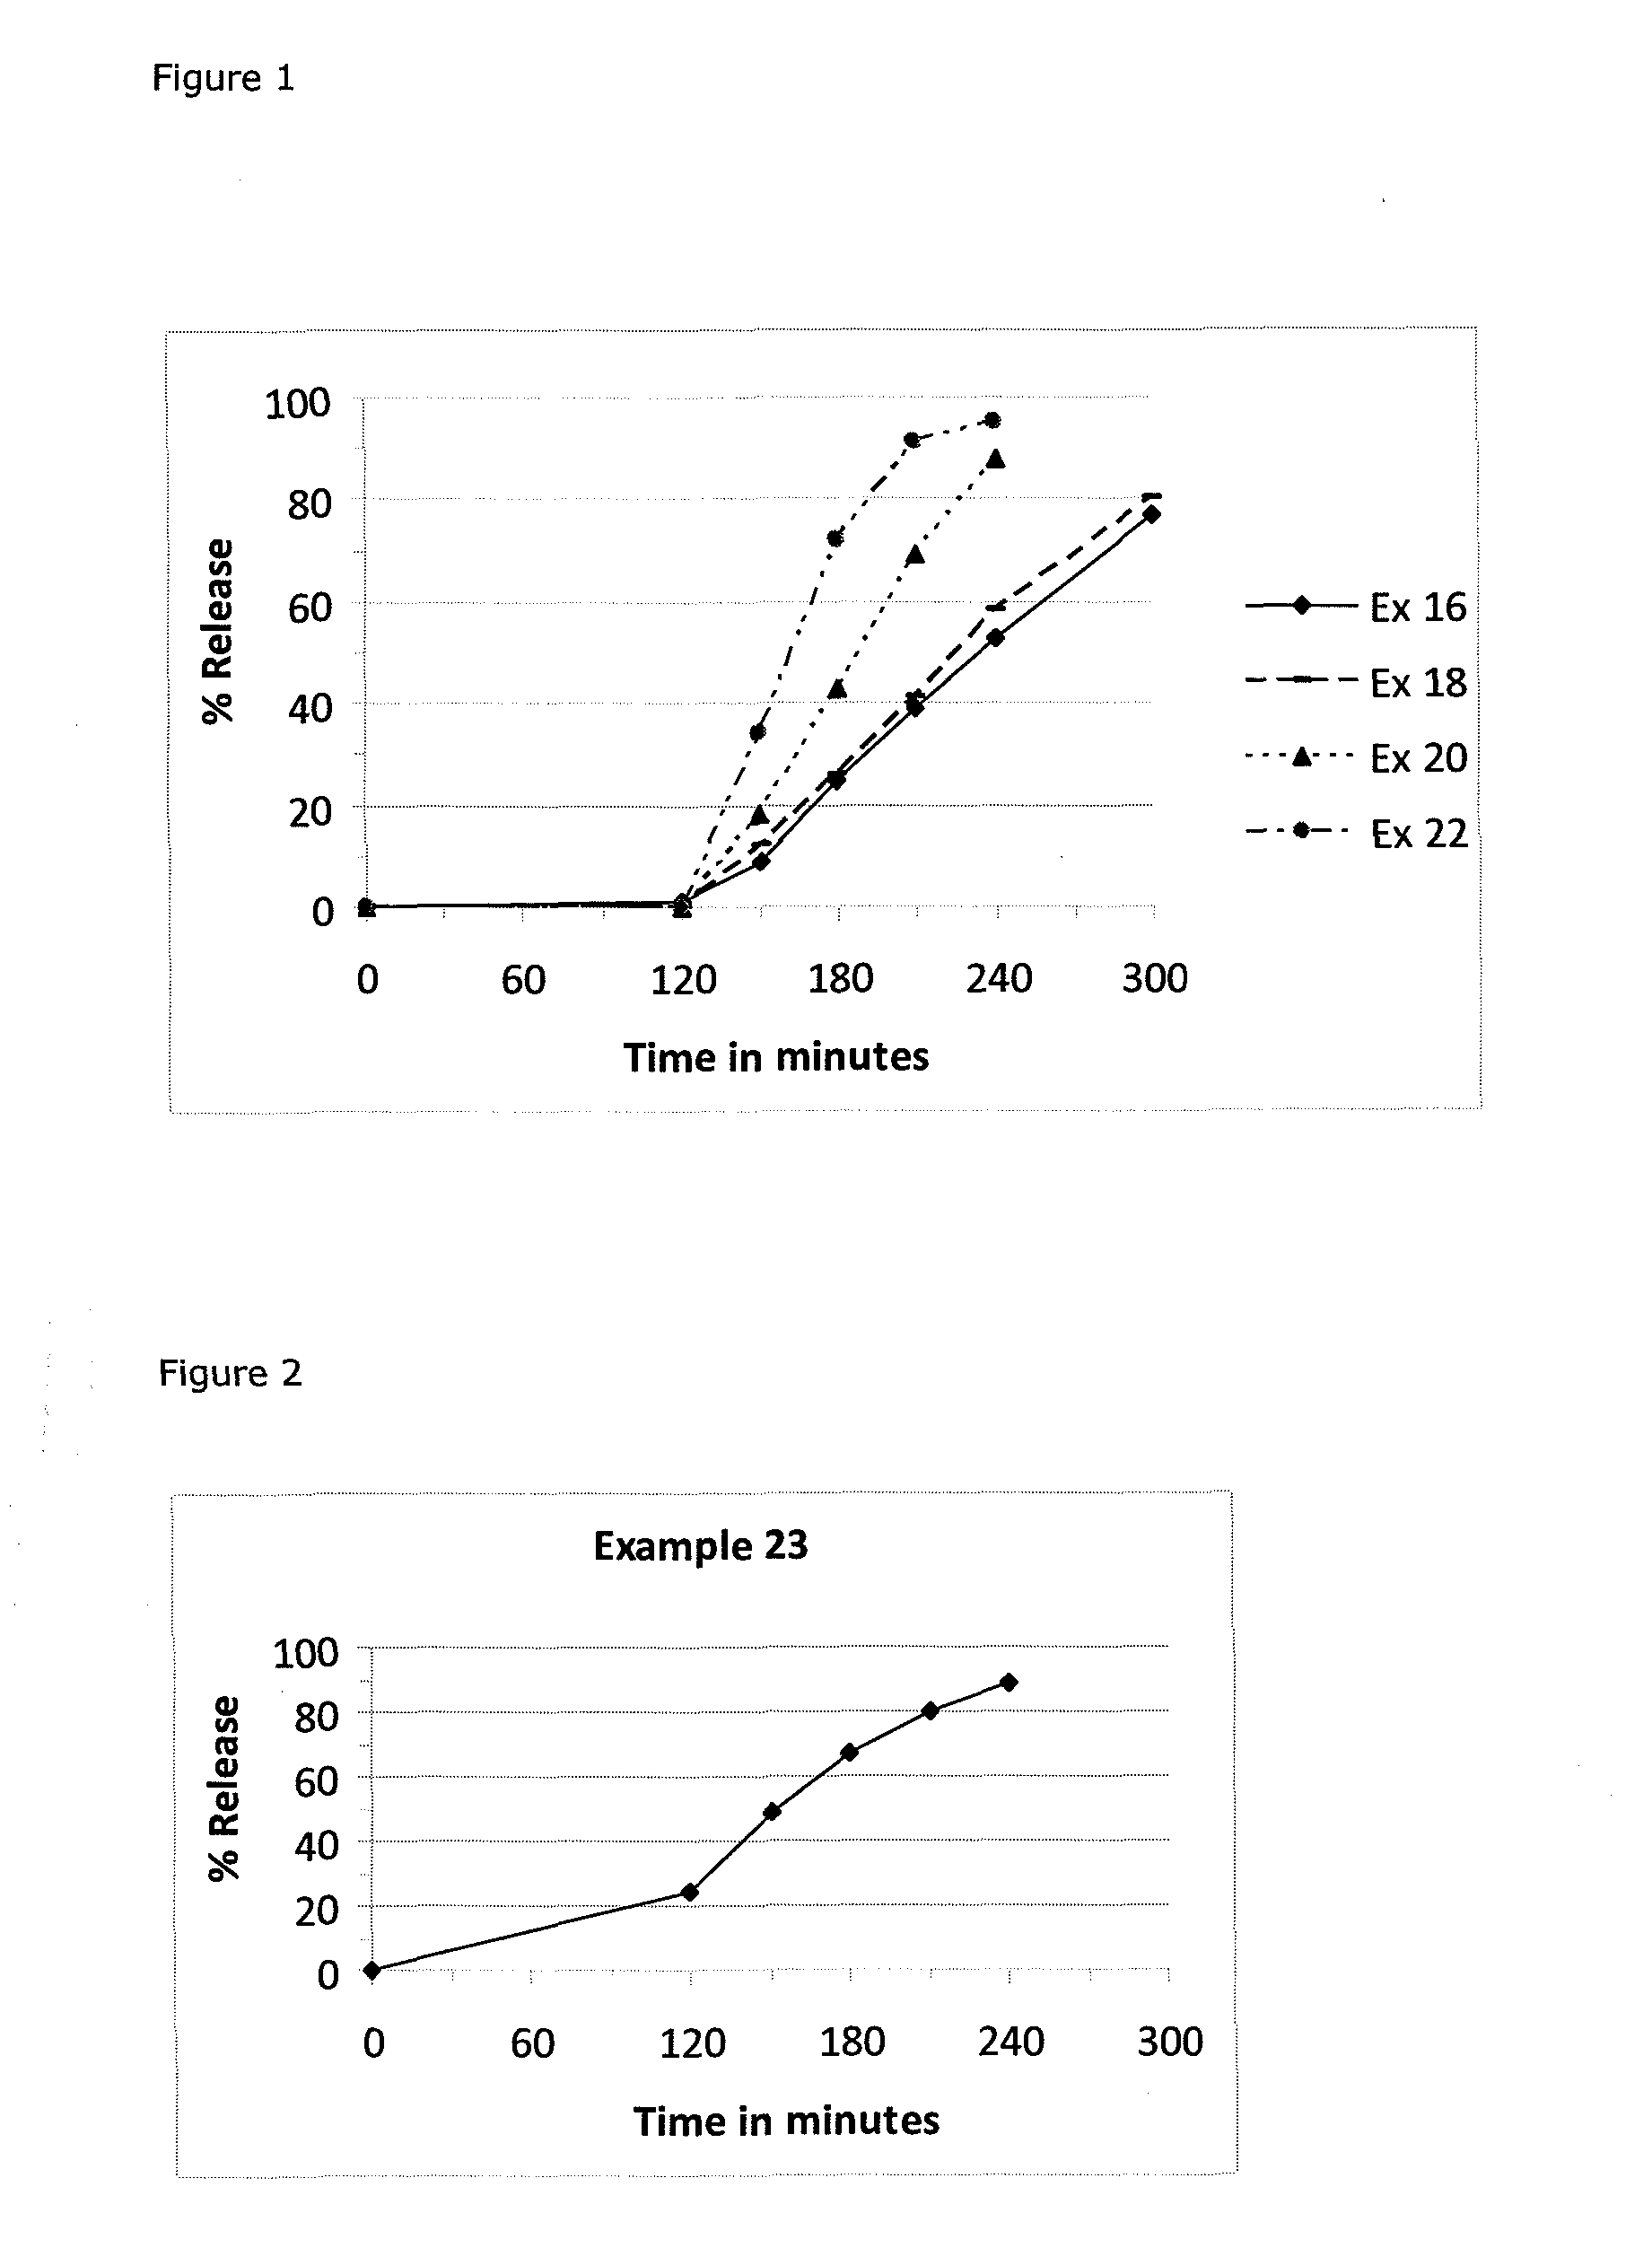 Pharmaceutical formulation comprising one or more fumaric acid esters in an erosion matrix